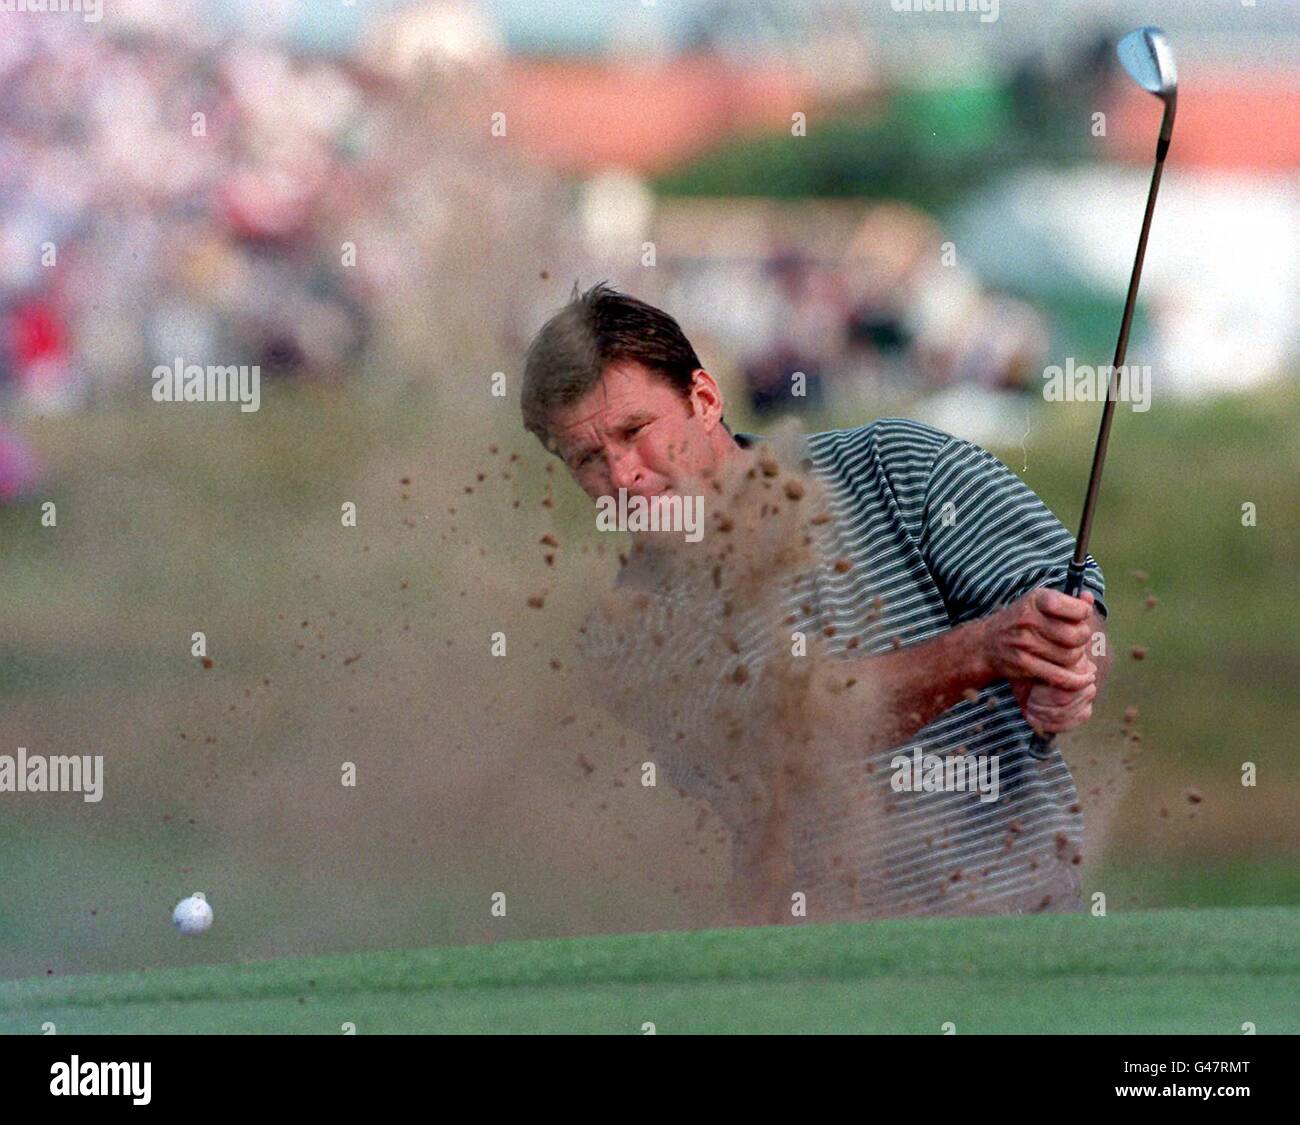 England's Nick Faldo uses his sand wedge to good effect to escape a bunker on the 4th during 126th Open Championship at Royal Troon 2nd round this morning (Friday). Photo by Adam Butler/PA. Stock Photo